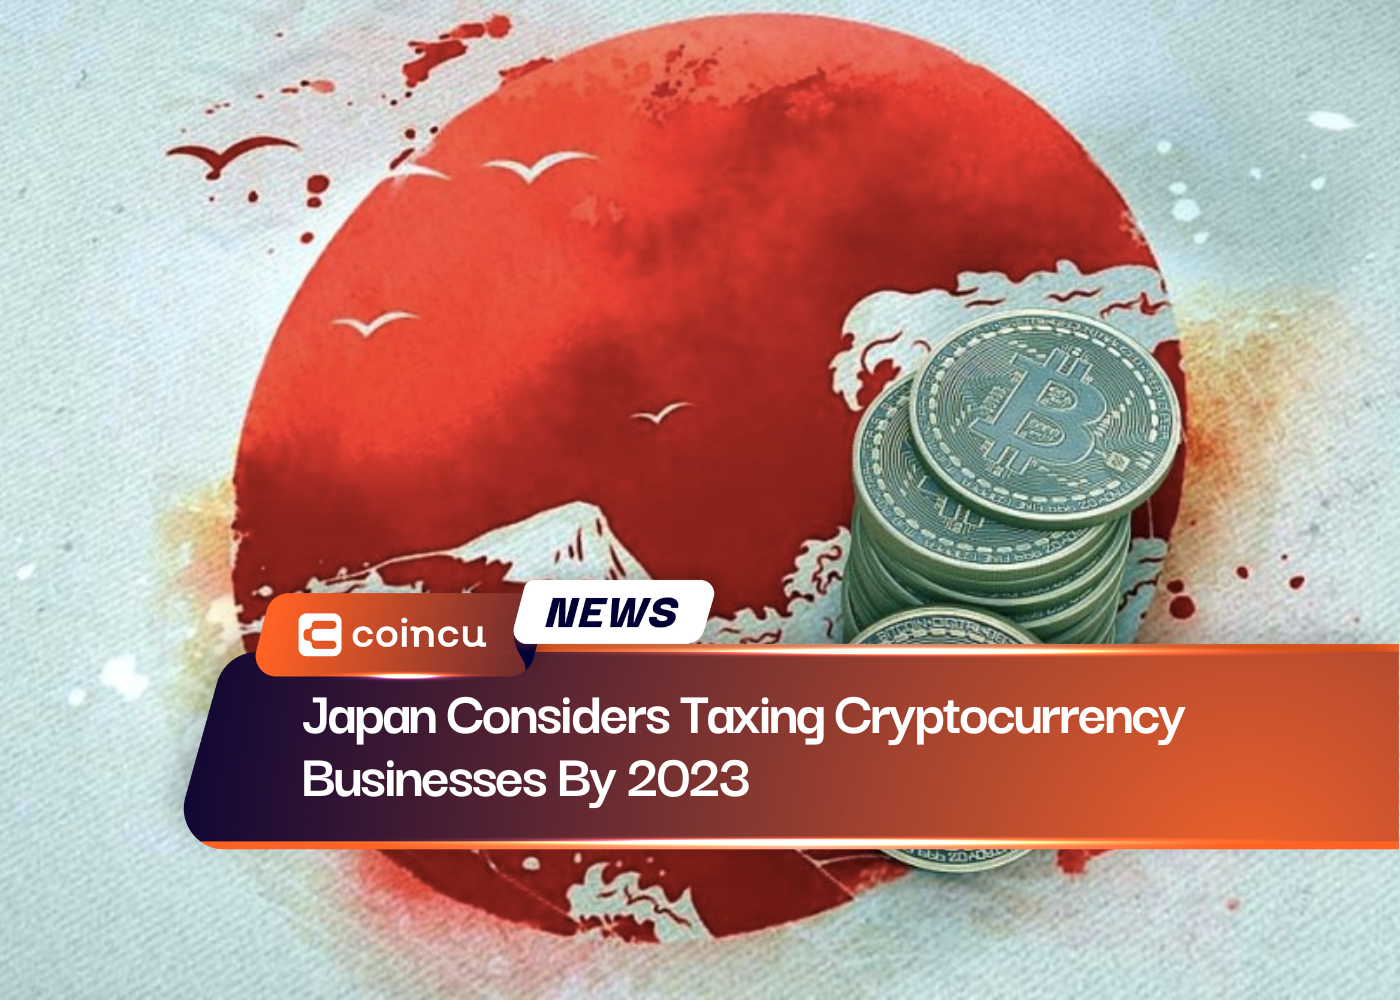 Japan Considers Taxing Cryptocurrency Businesses By 2023